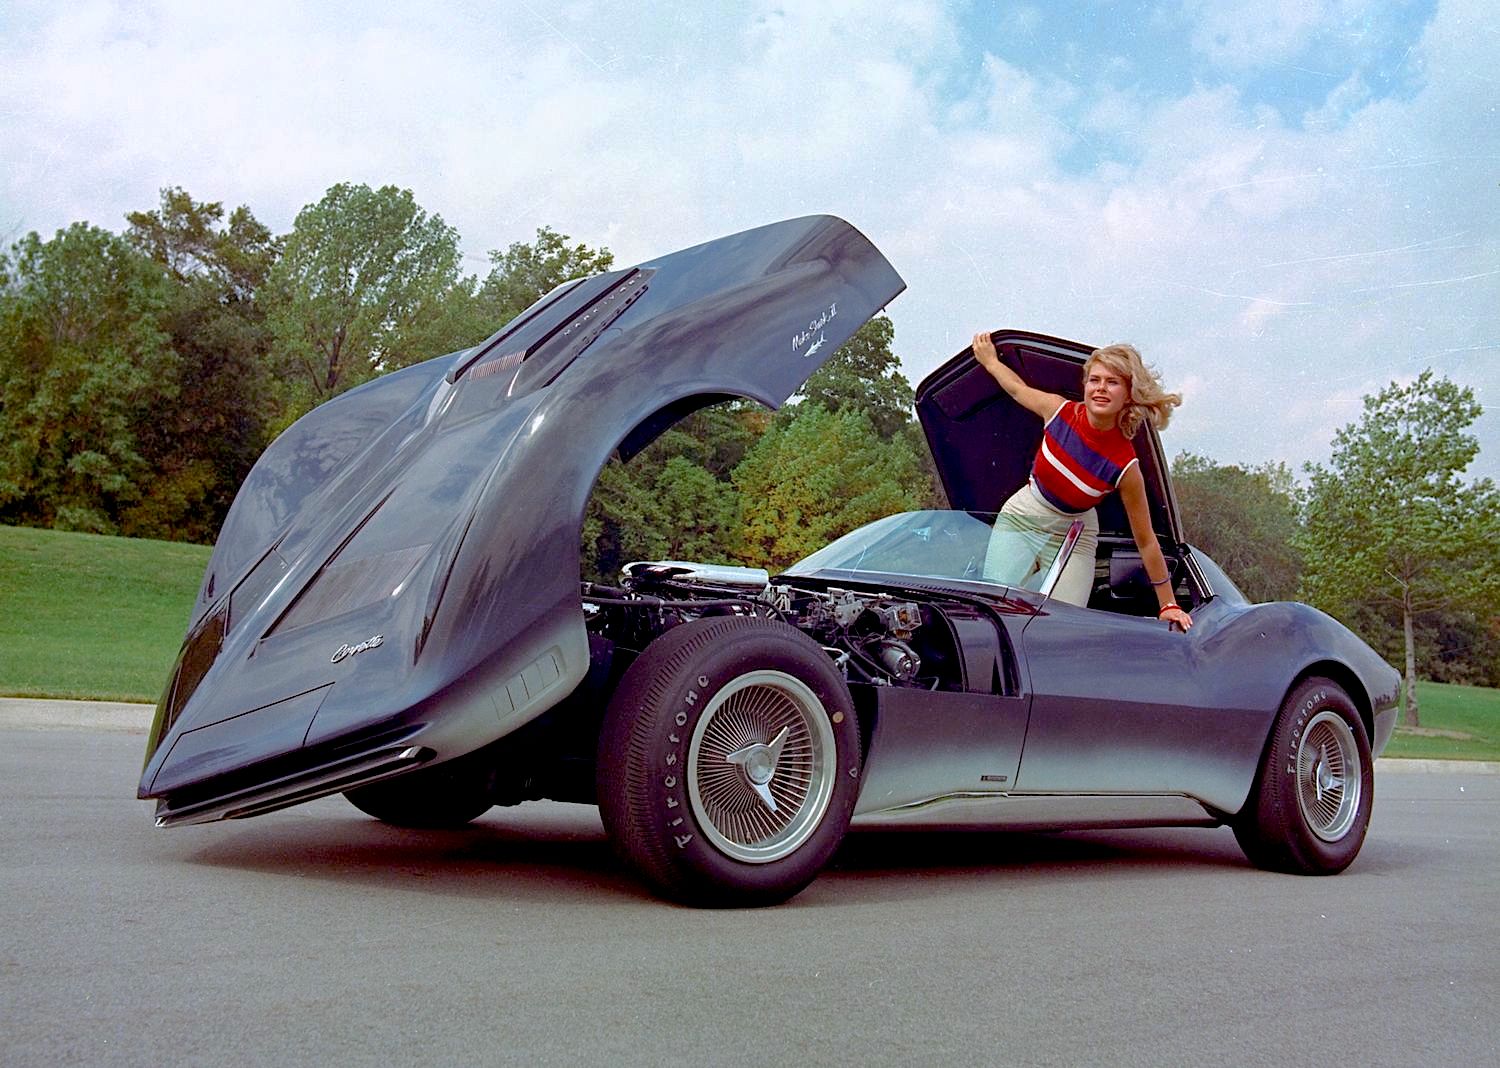 Chevrolet Mako Shark II, 1965 - The Mako Shark II's roof lifted for better access and was removable for pace car duties. This led to removable roof hatches in the 1968-1982 Corvettes.